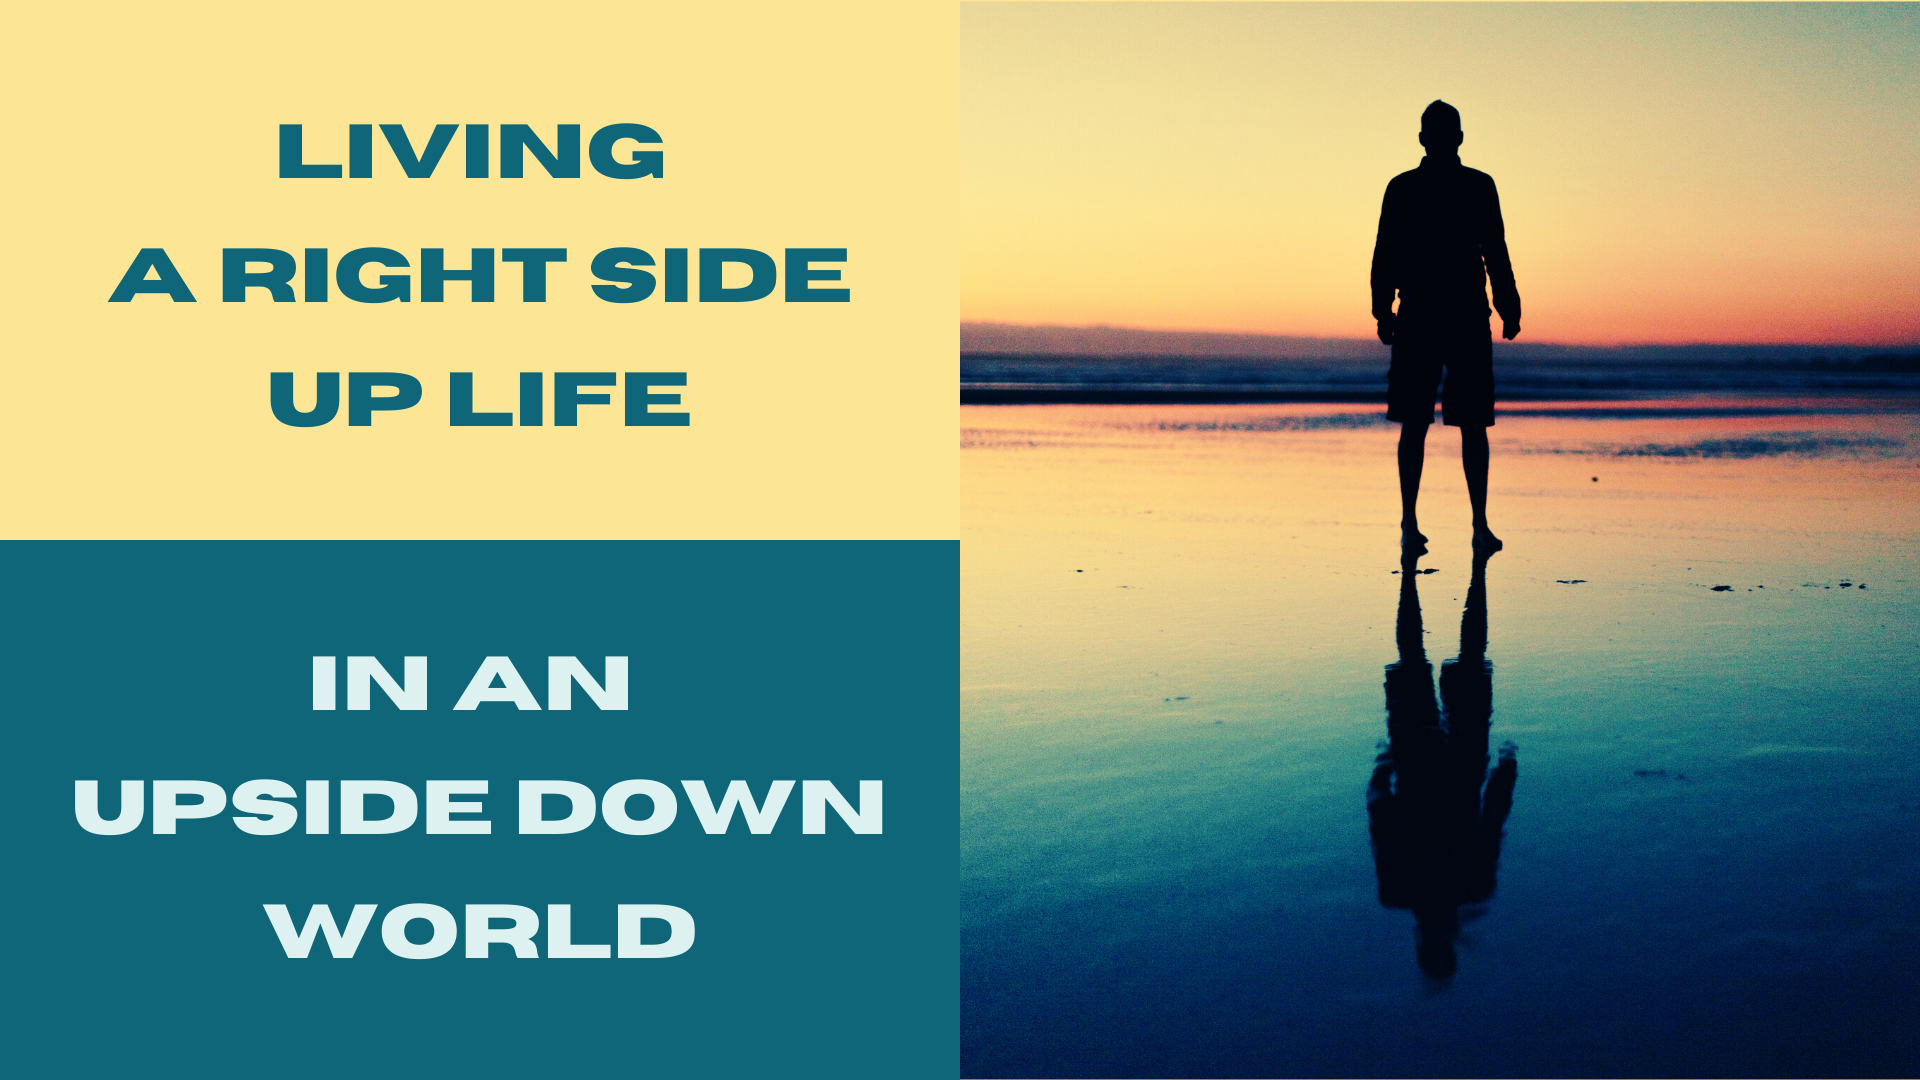 Living a Right-side Up Life in an Upside Down World